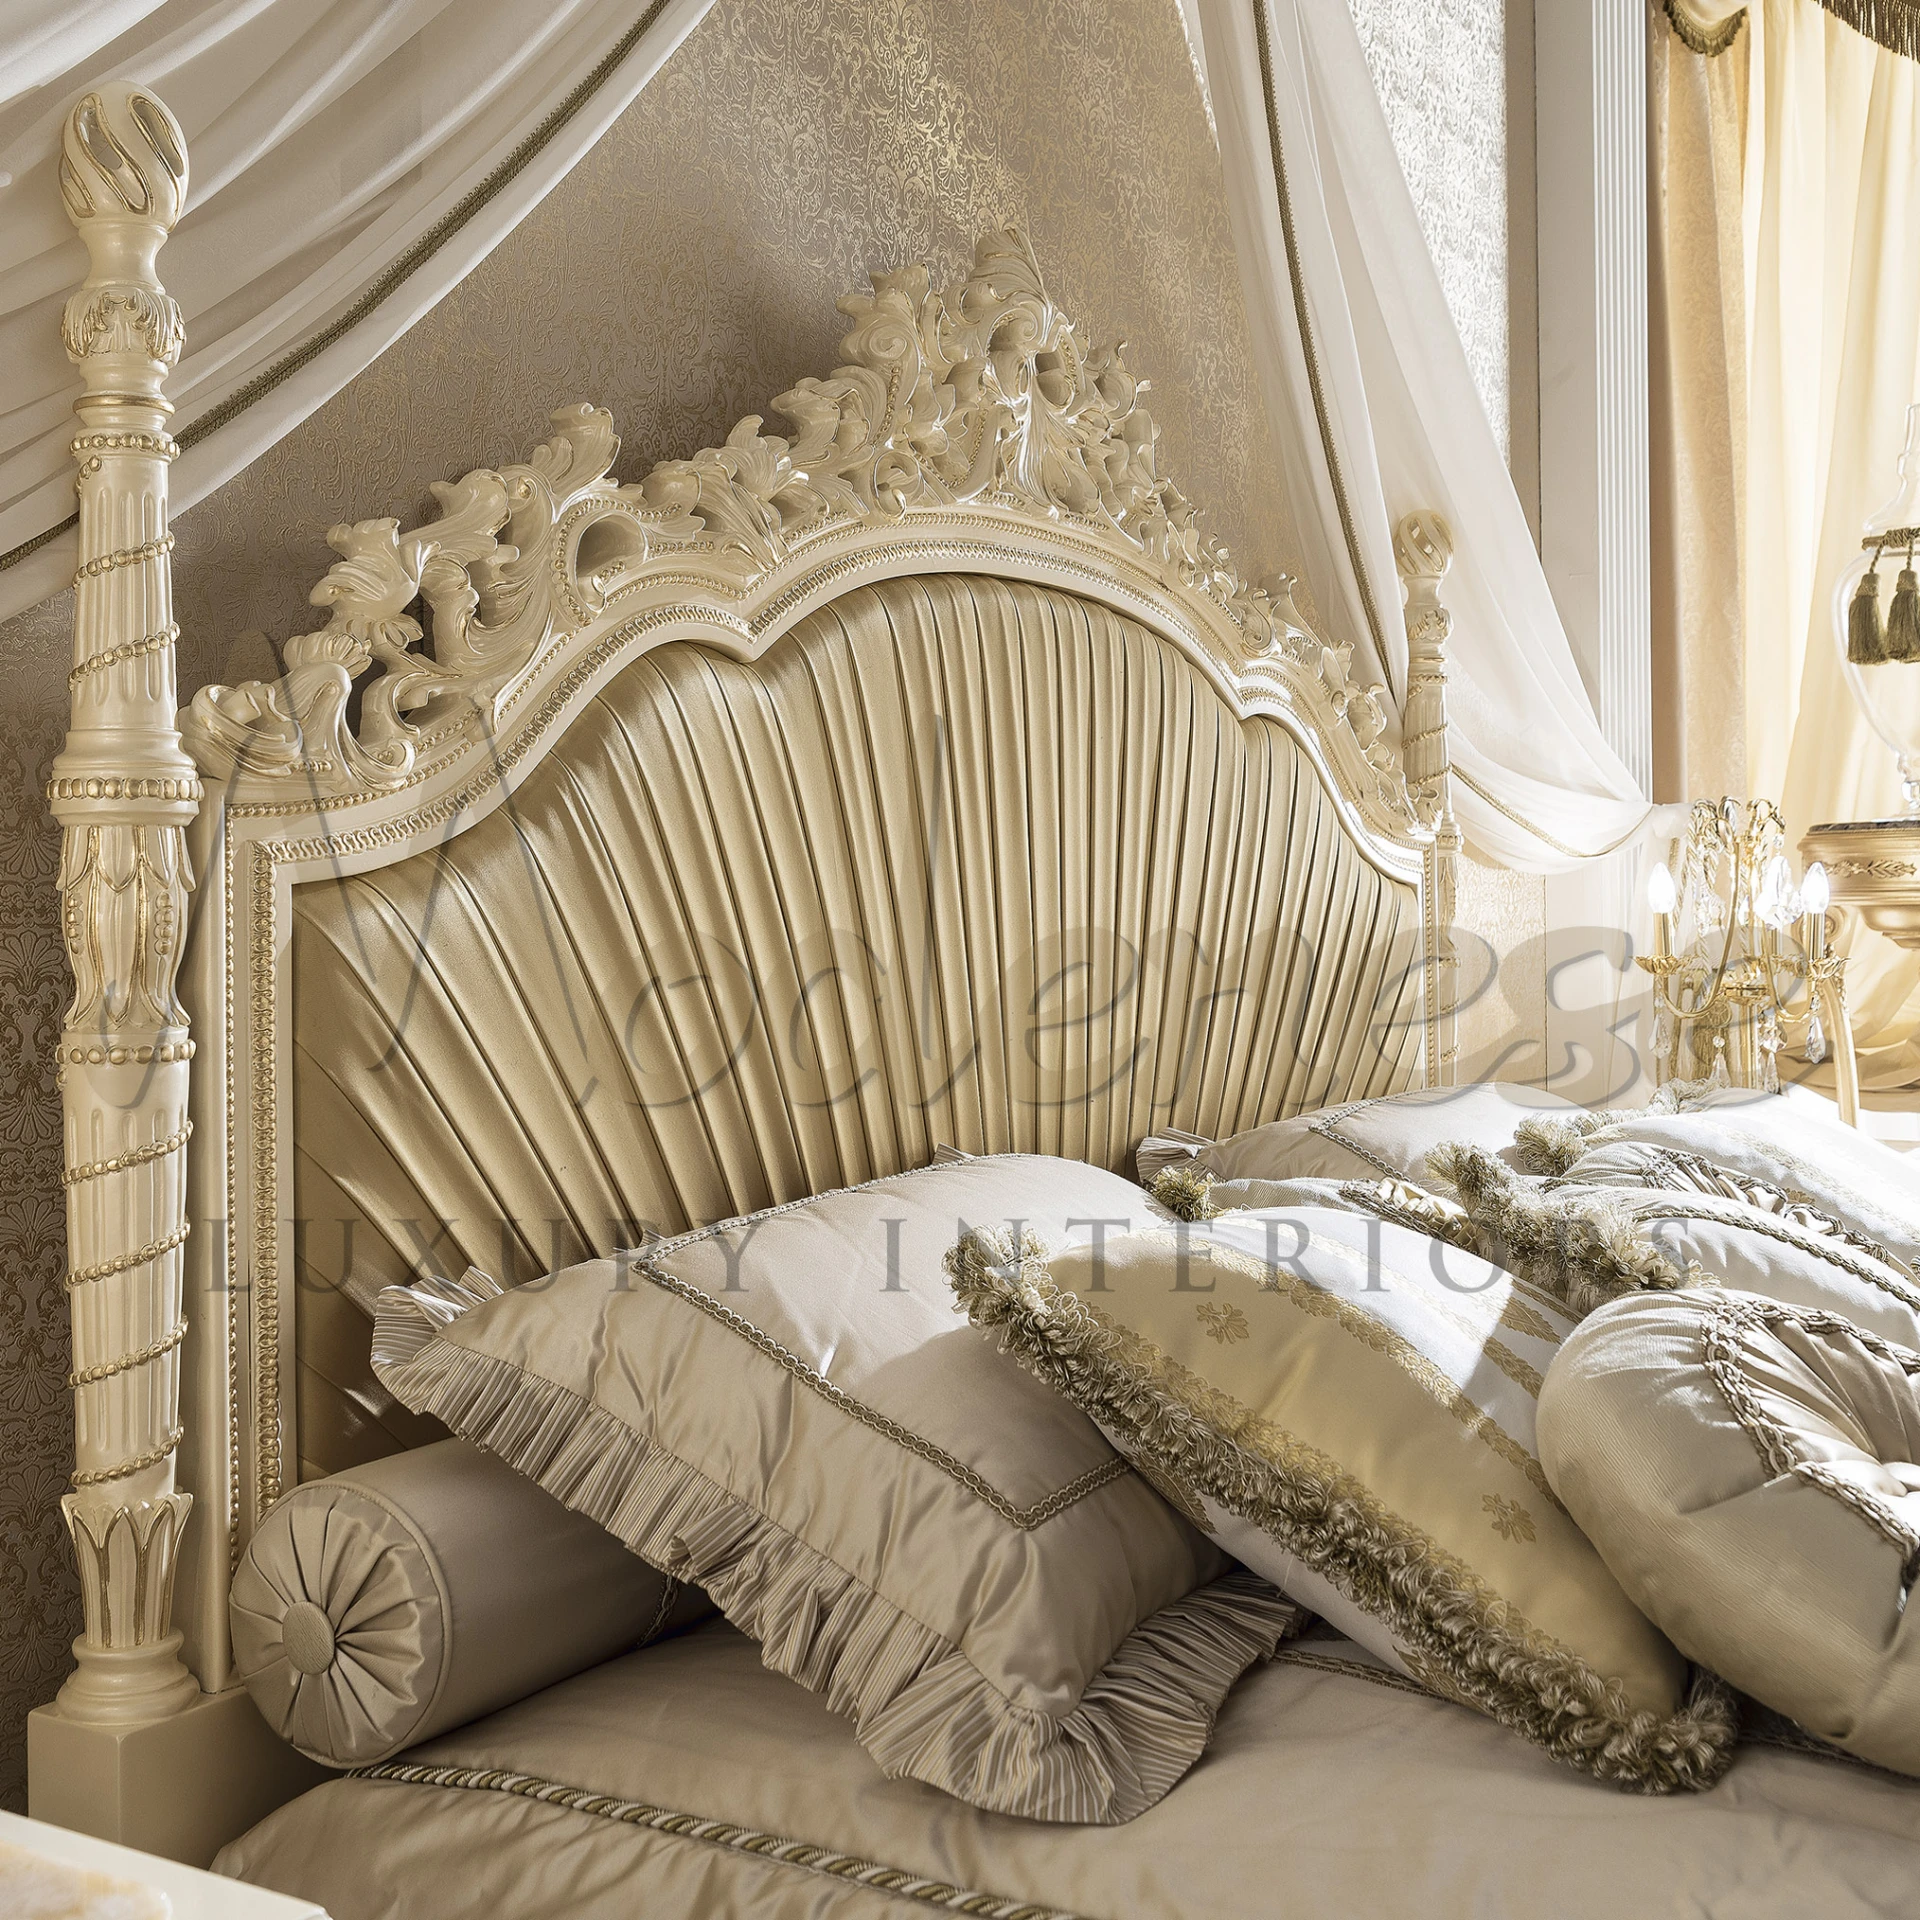 An ornate classical beige double bed with elaborate carvings and plush bedding, featuring a high headboard and bed skirt, showcasing luxurious design.